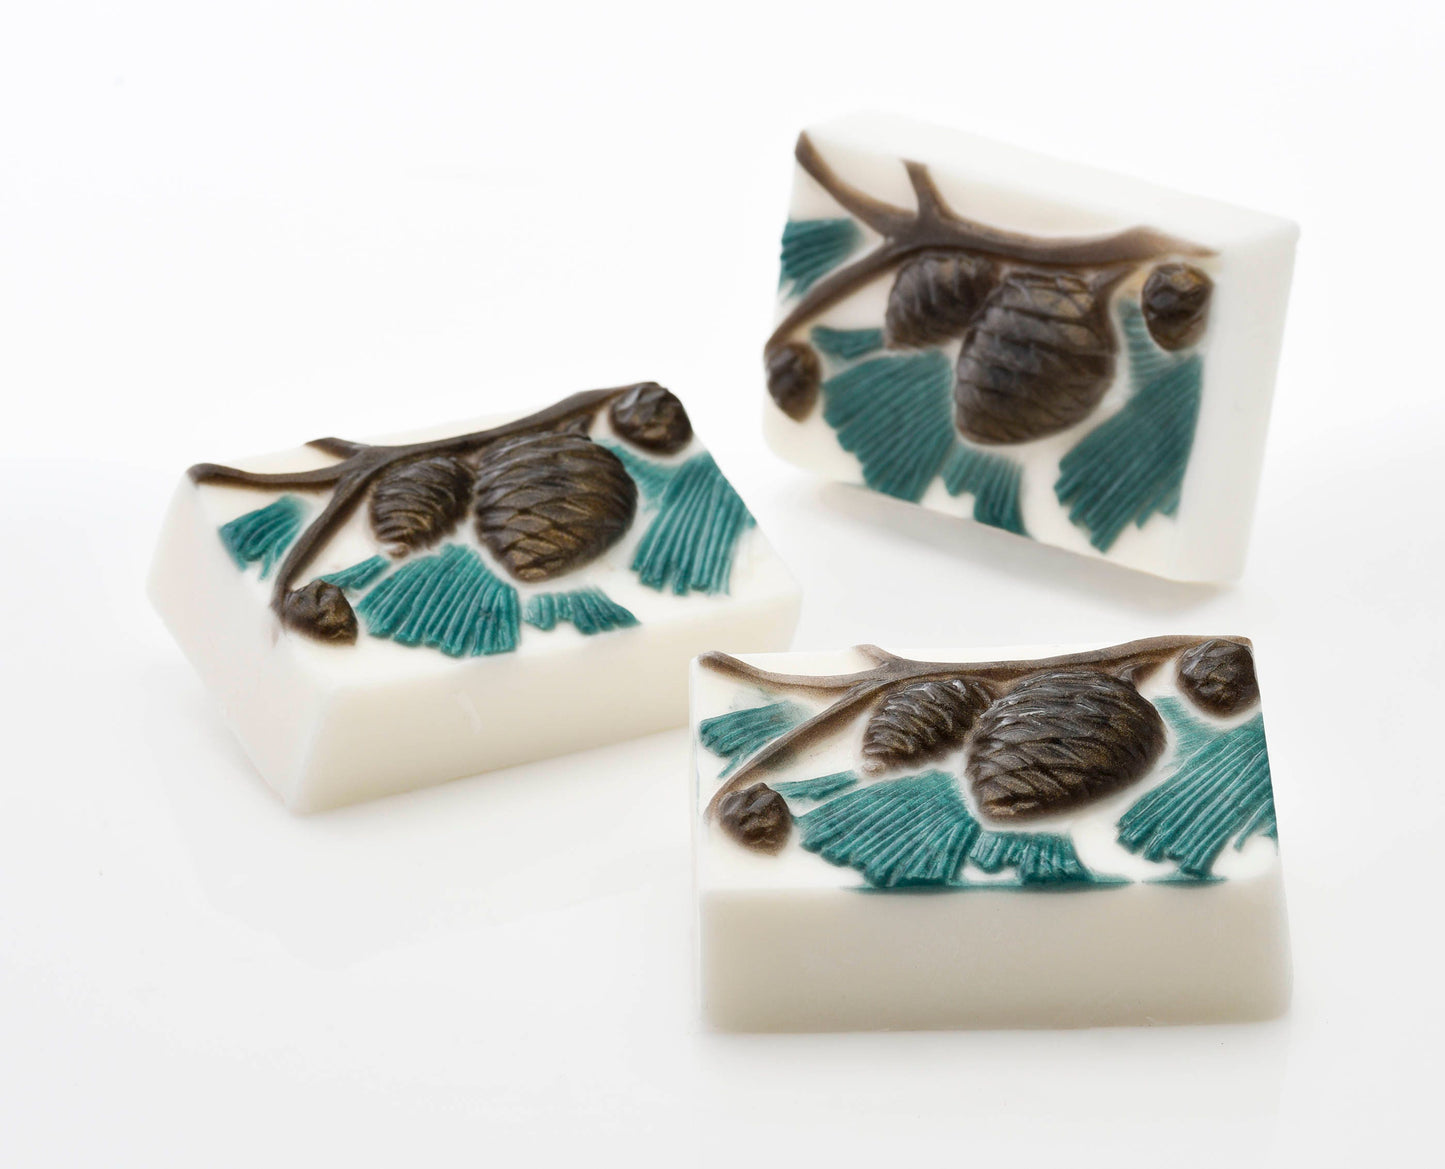 Pine cone and branch soap, pine soap, glycerin soap,